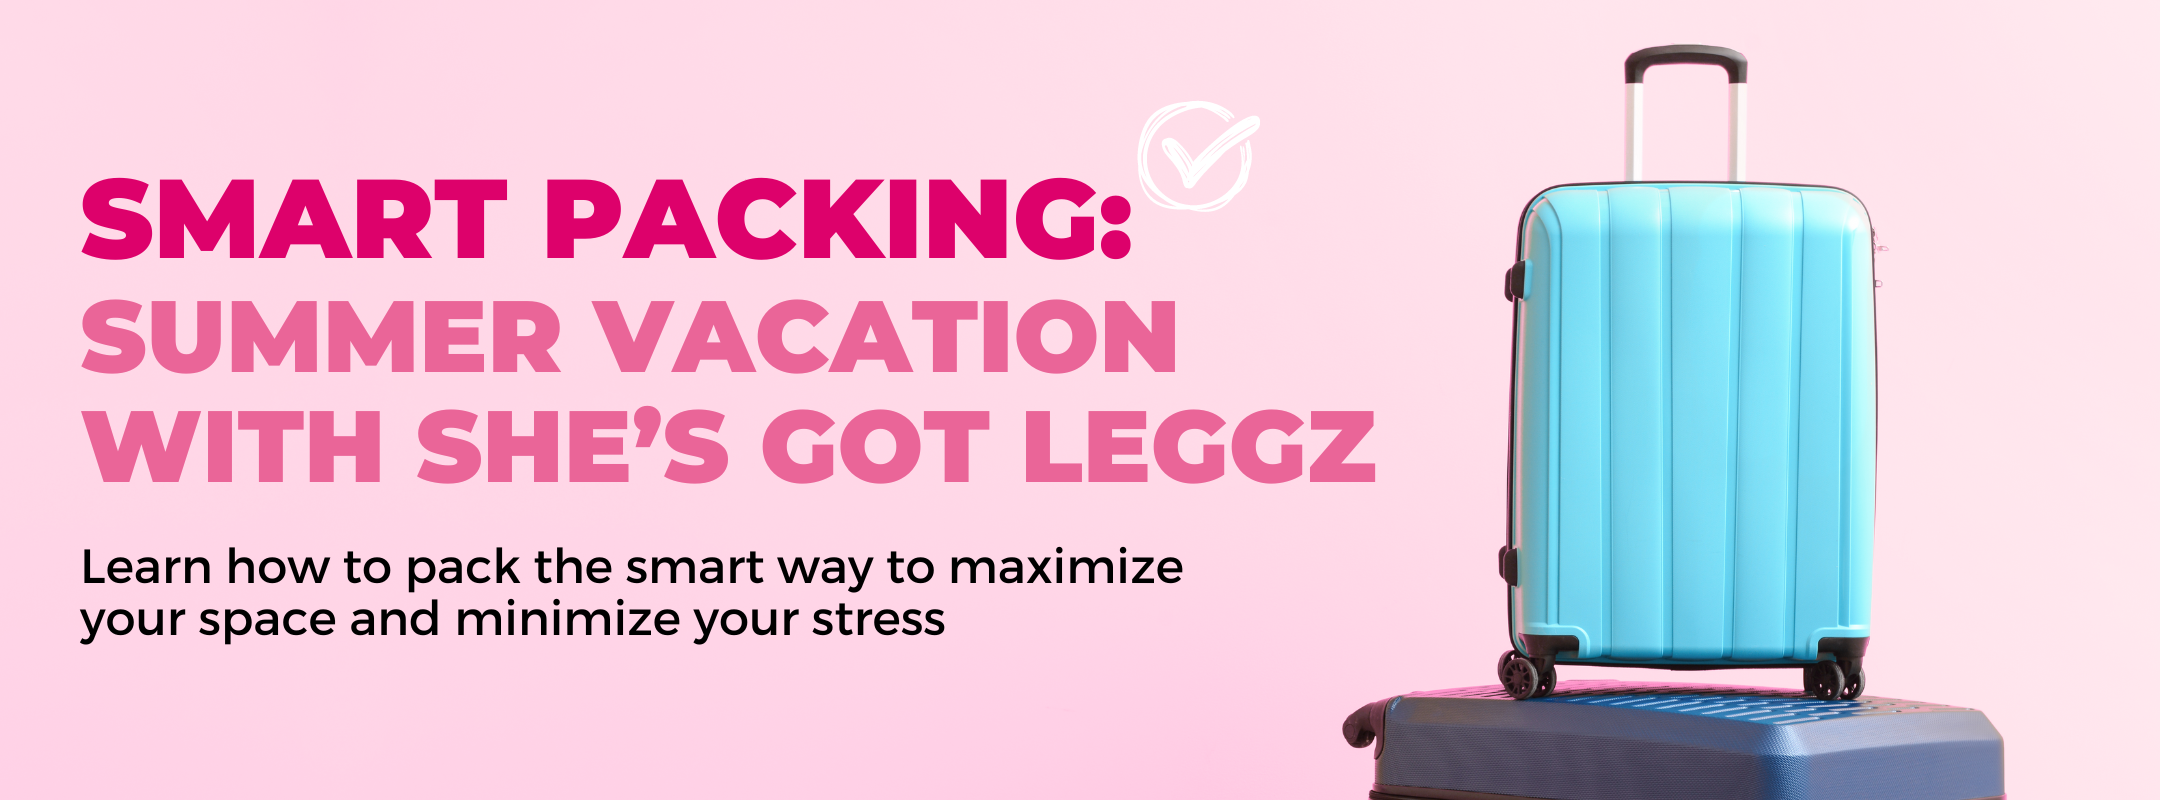 Ultimate Packing Tips: Summer Vacation with She’s Got Leggz